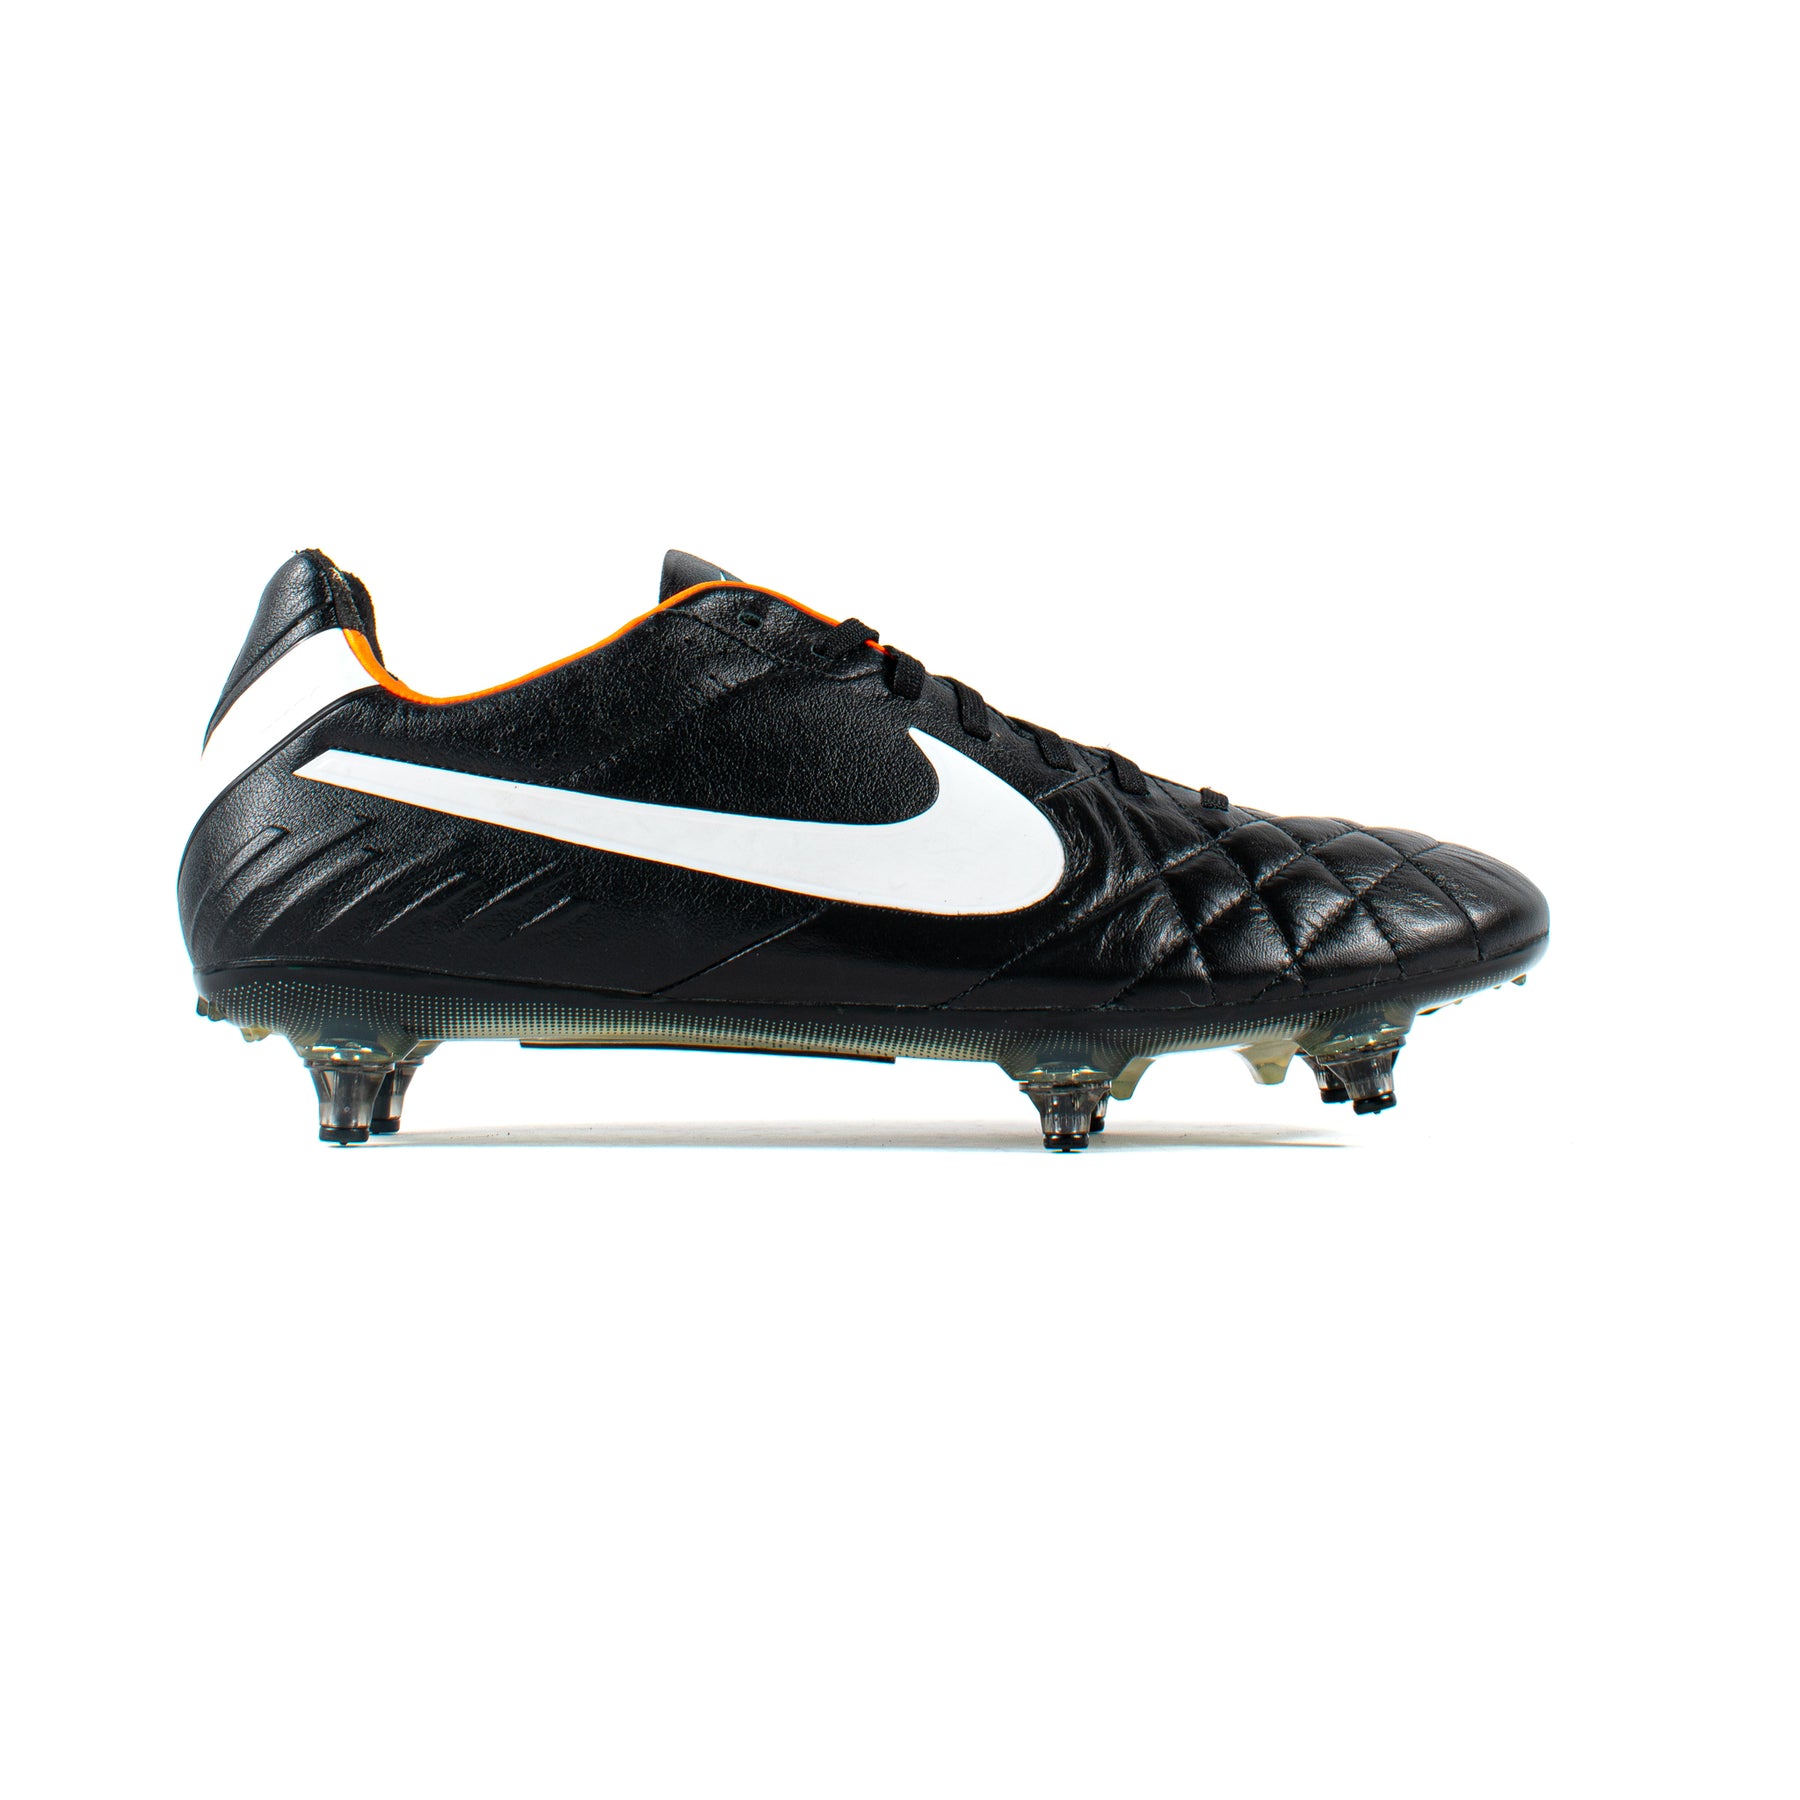 Nike Tiempo IV SG – Classic Soccer Cleats